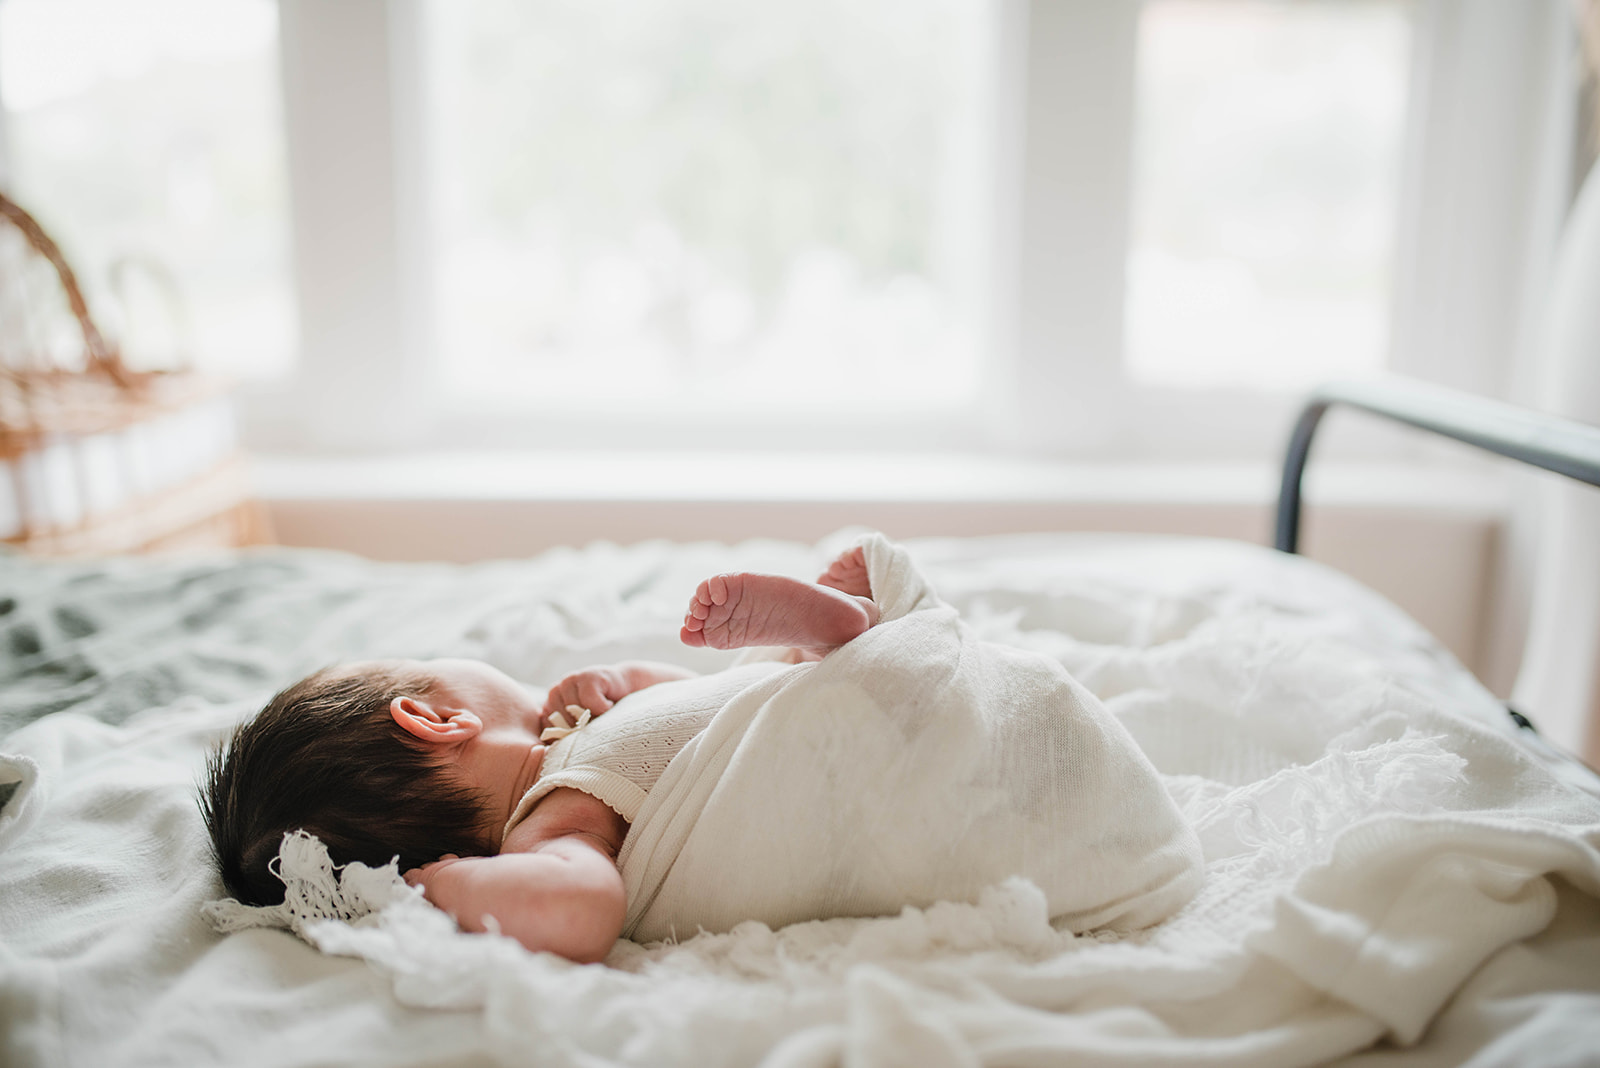 Photograph of newborn baby on a bed with soft window light 